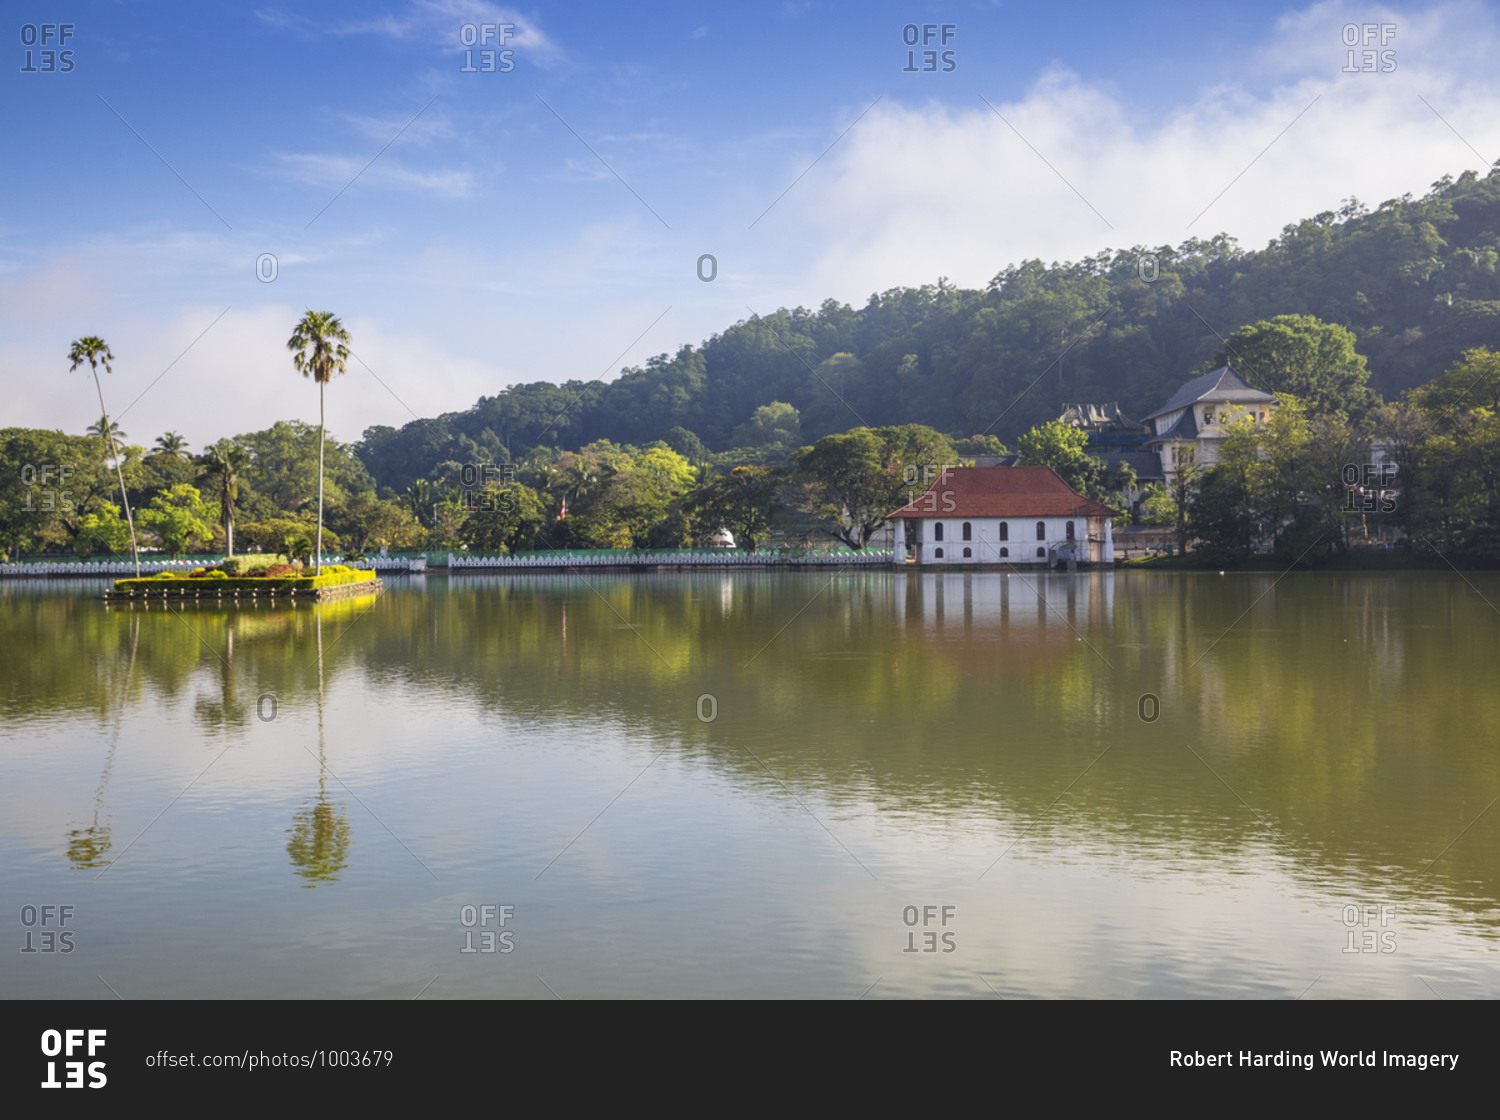 Kandy Lake and the Temple of the Tooth, Kandy, UNESCO World Heritage Site, Central Province, Sri Lanka, Asia